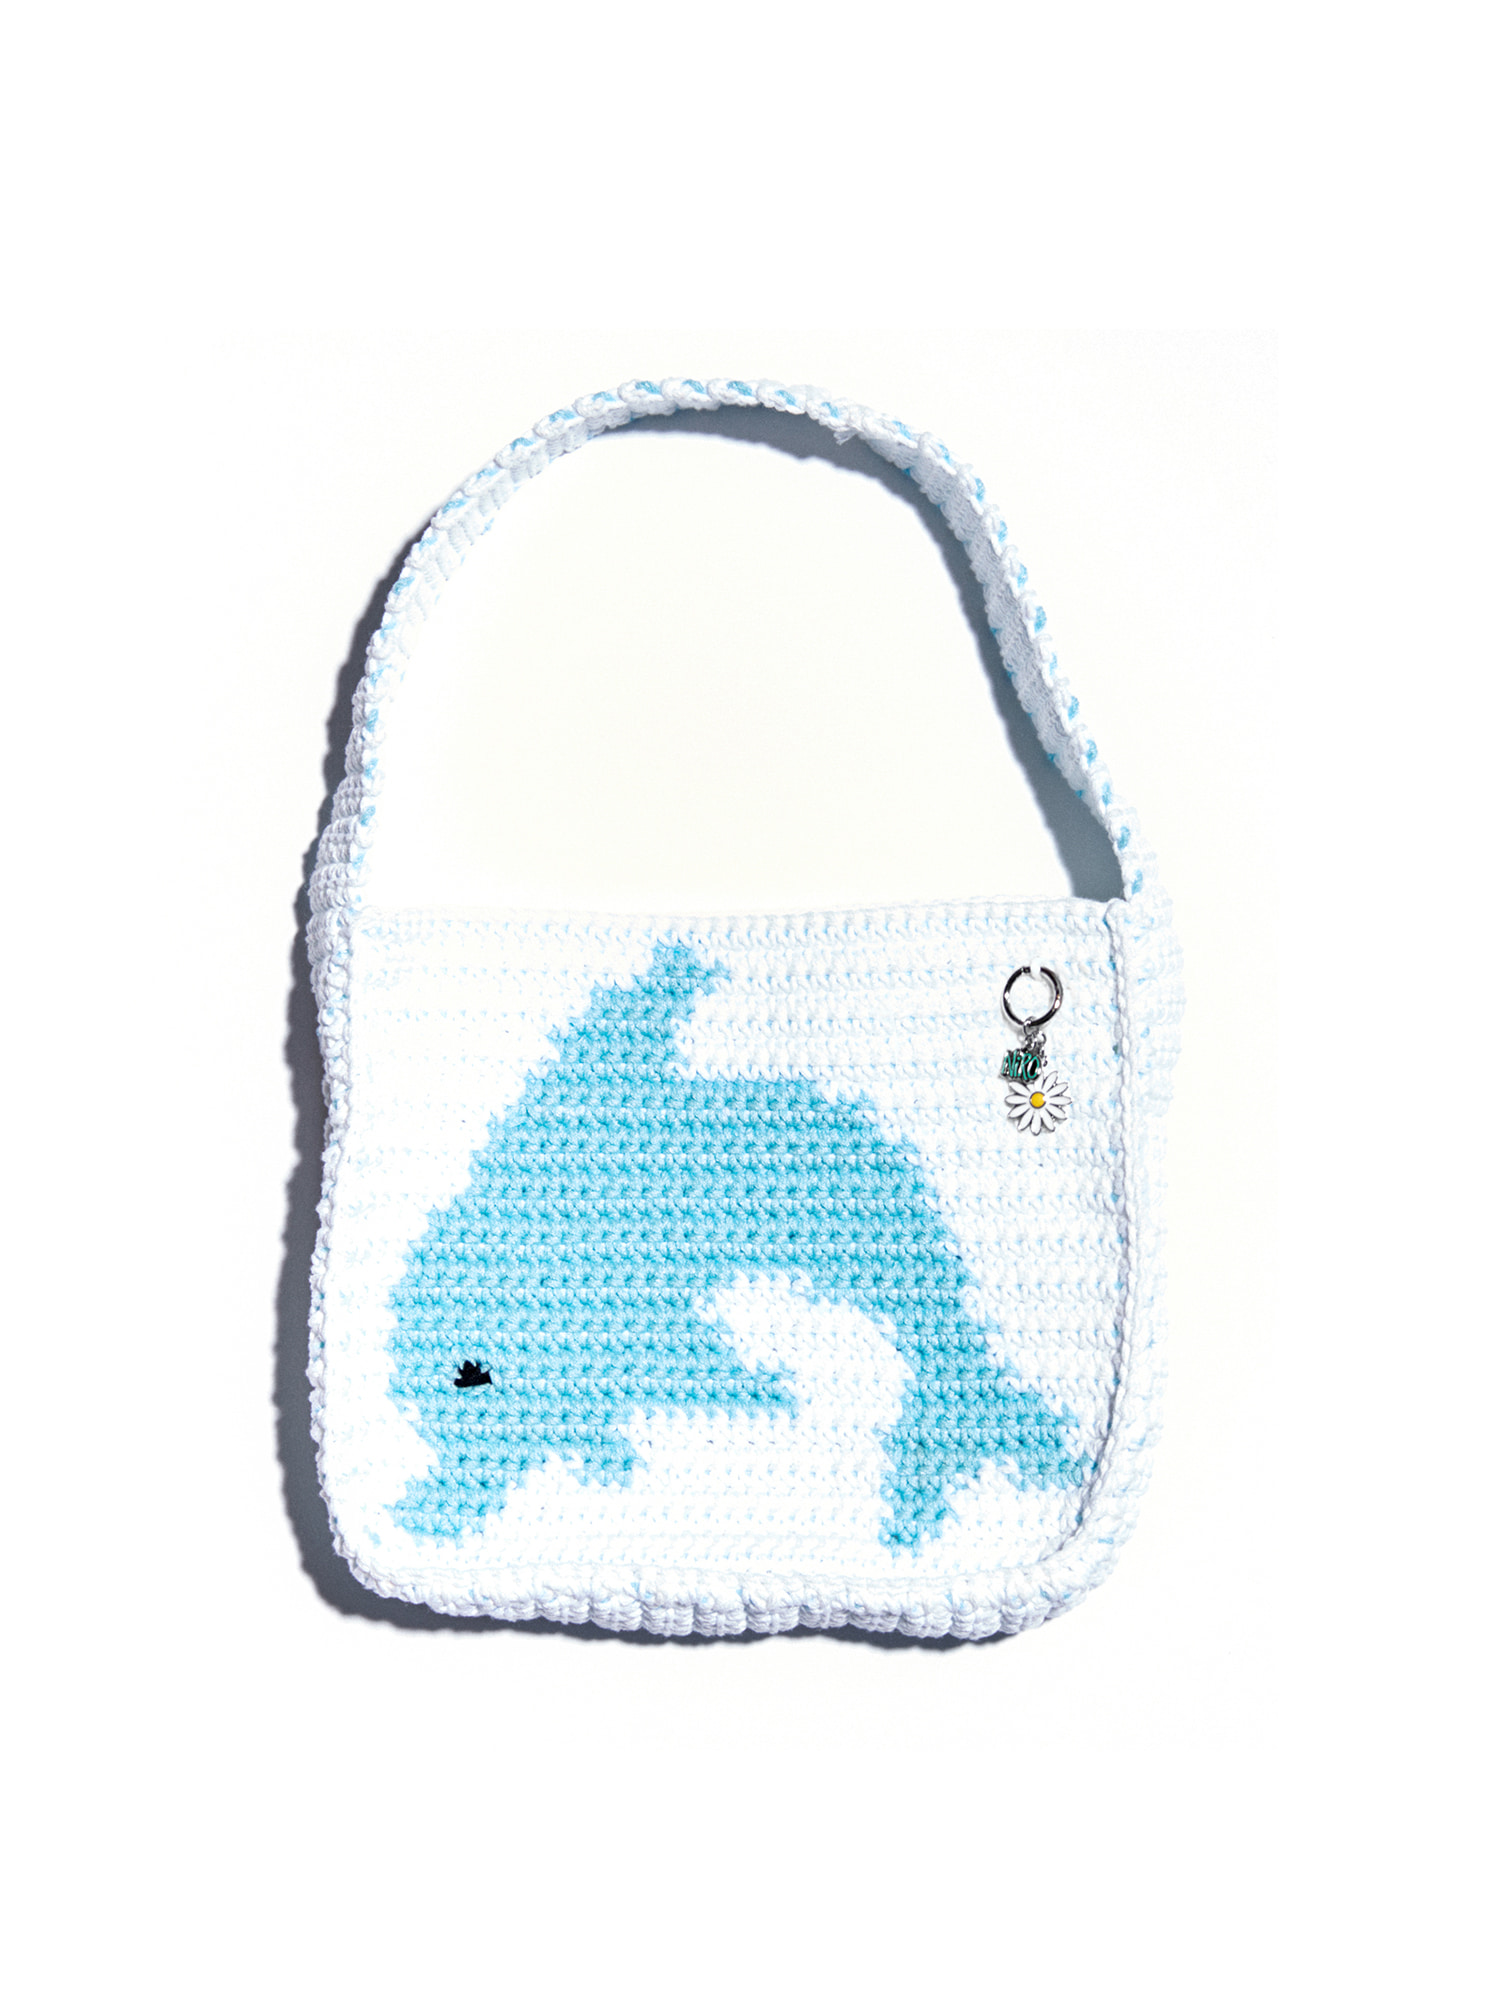 Dolphin Small Hand Bag #950 #960